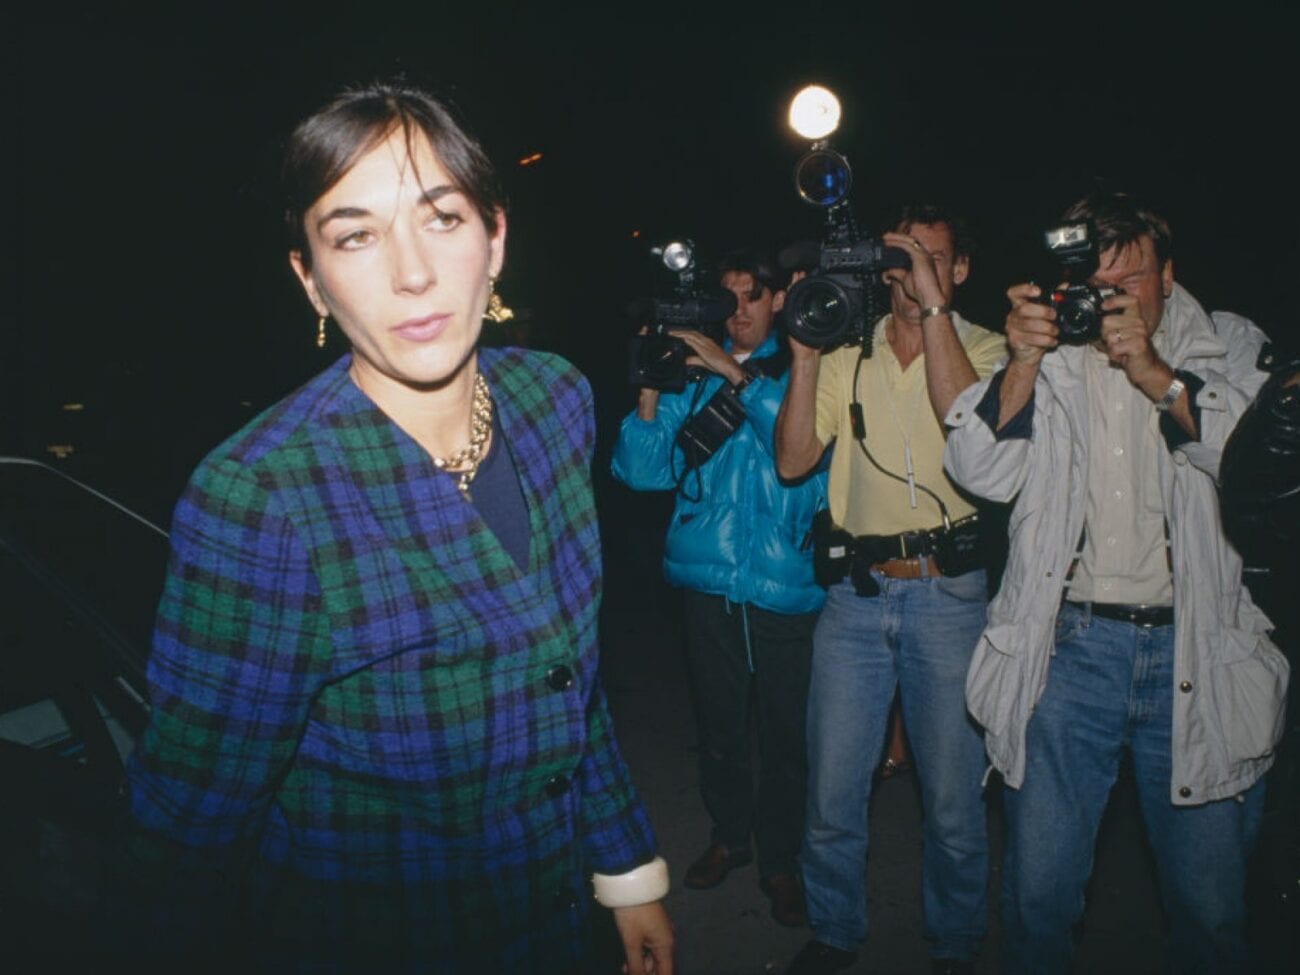 Ghislaine Maxwell lived a glamorous life in her elite social circles. How has Maxwell's look changed now that she faces sex-trafficking charges?